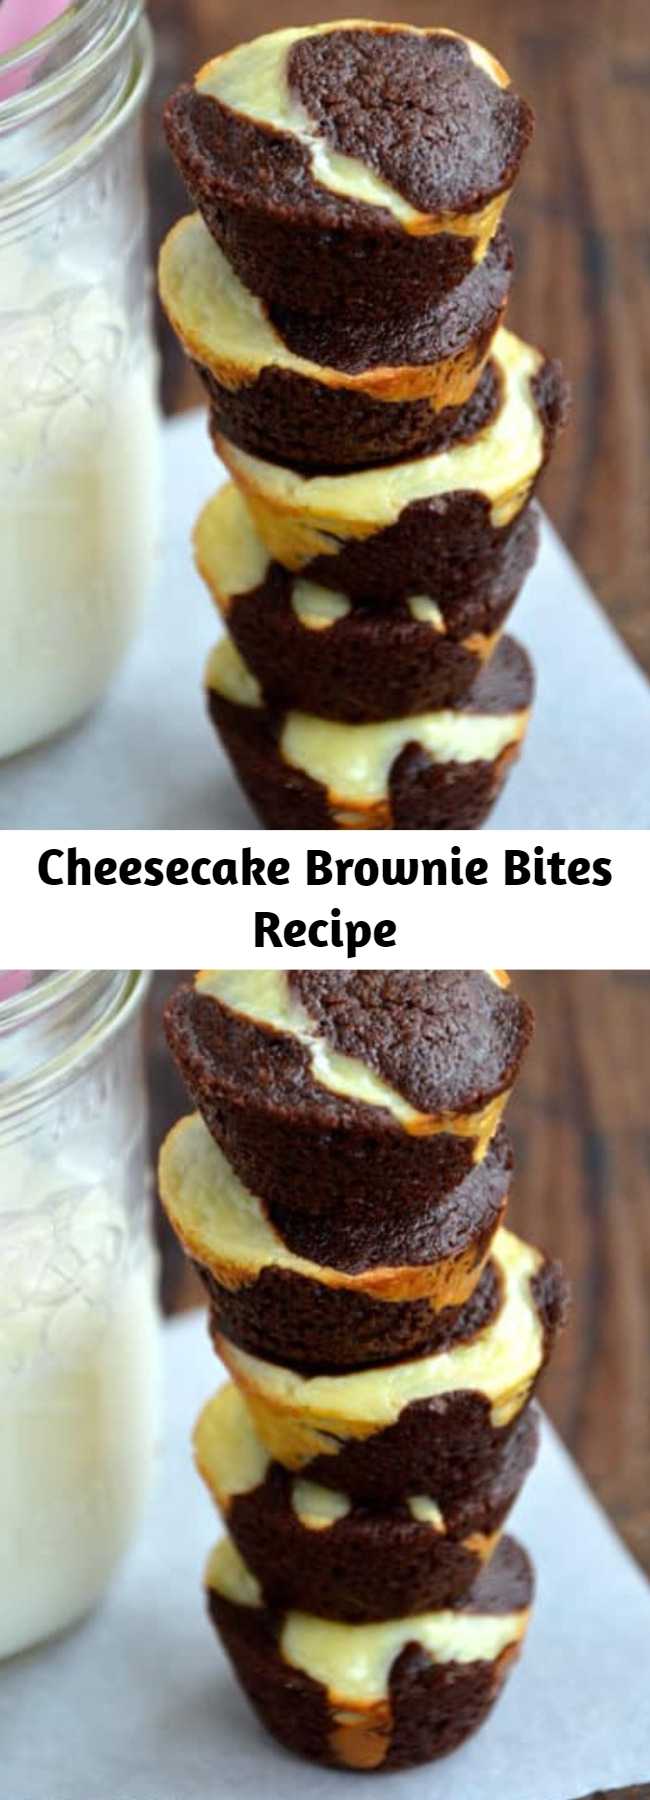 Cheesecake Brownie Bites Recipe - These are absolutely delicious.